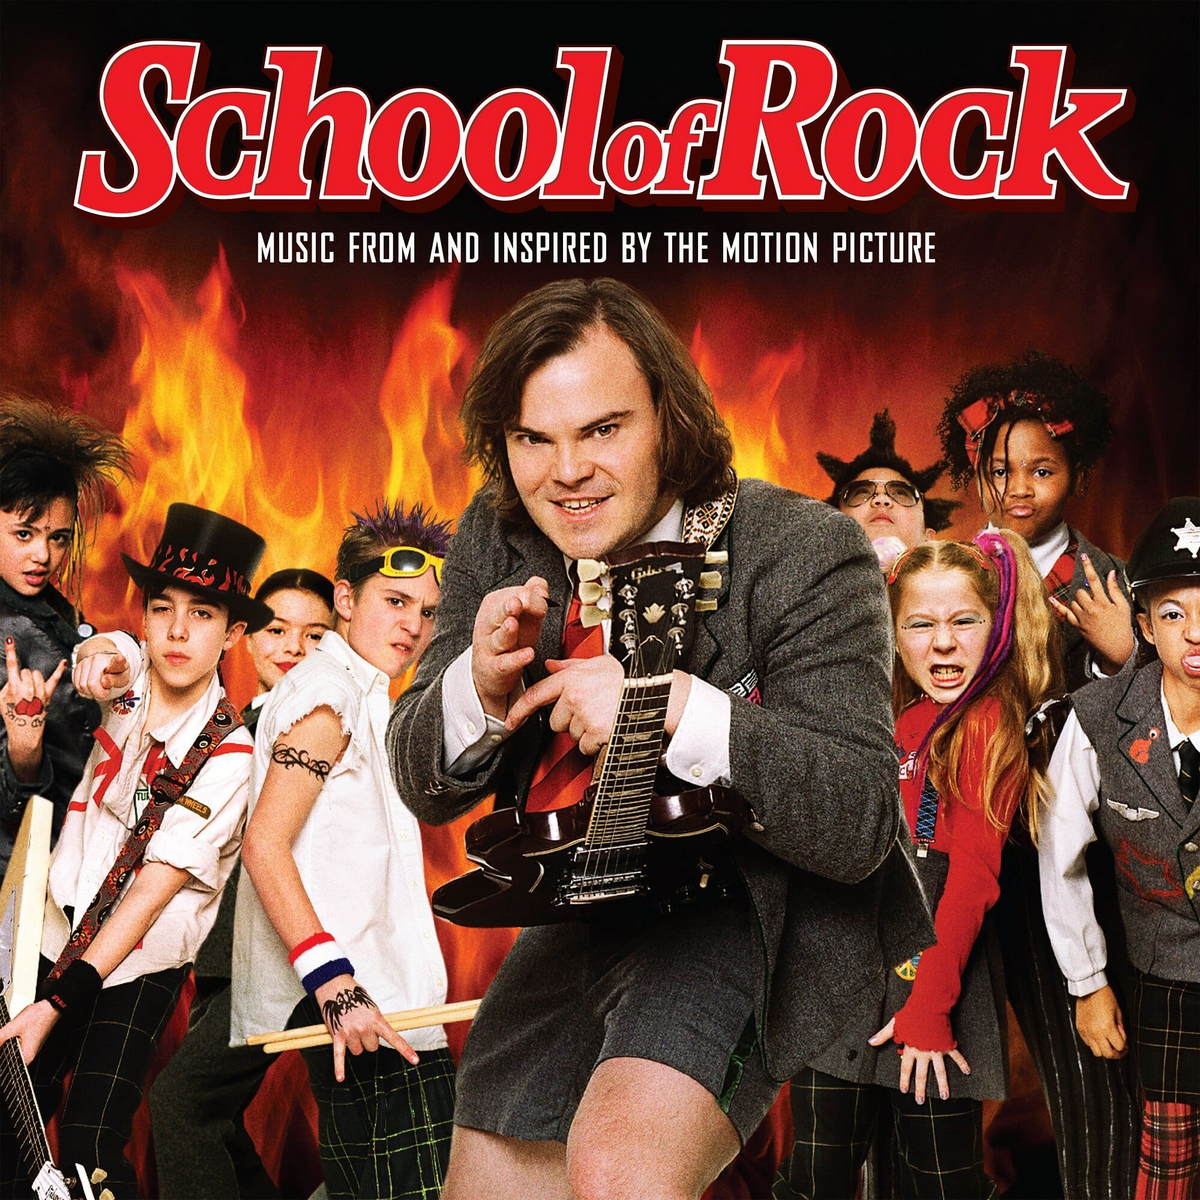 Саундтрек WM School of Rock (Music From And Inspired By The Motion Picture) (Rocktober 2021/Limited/Orange Vinyl)